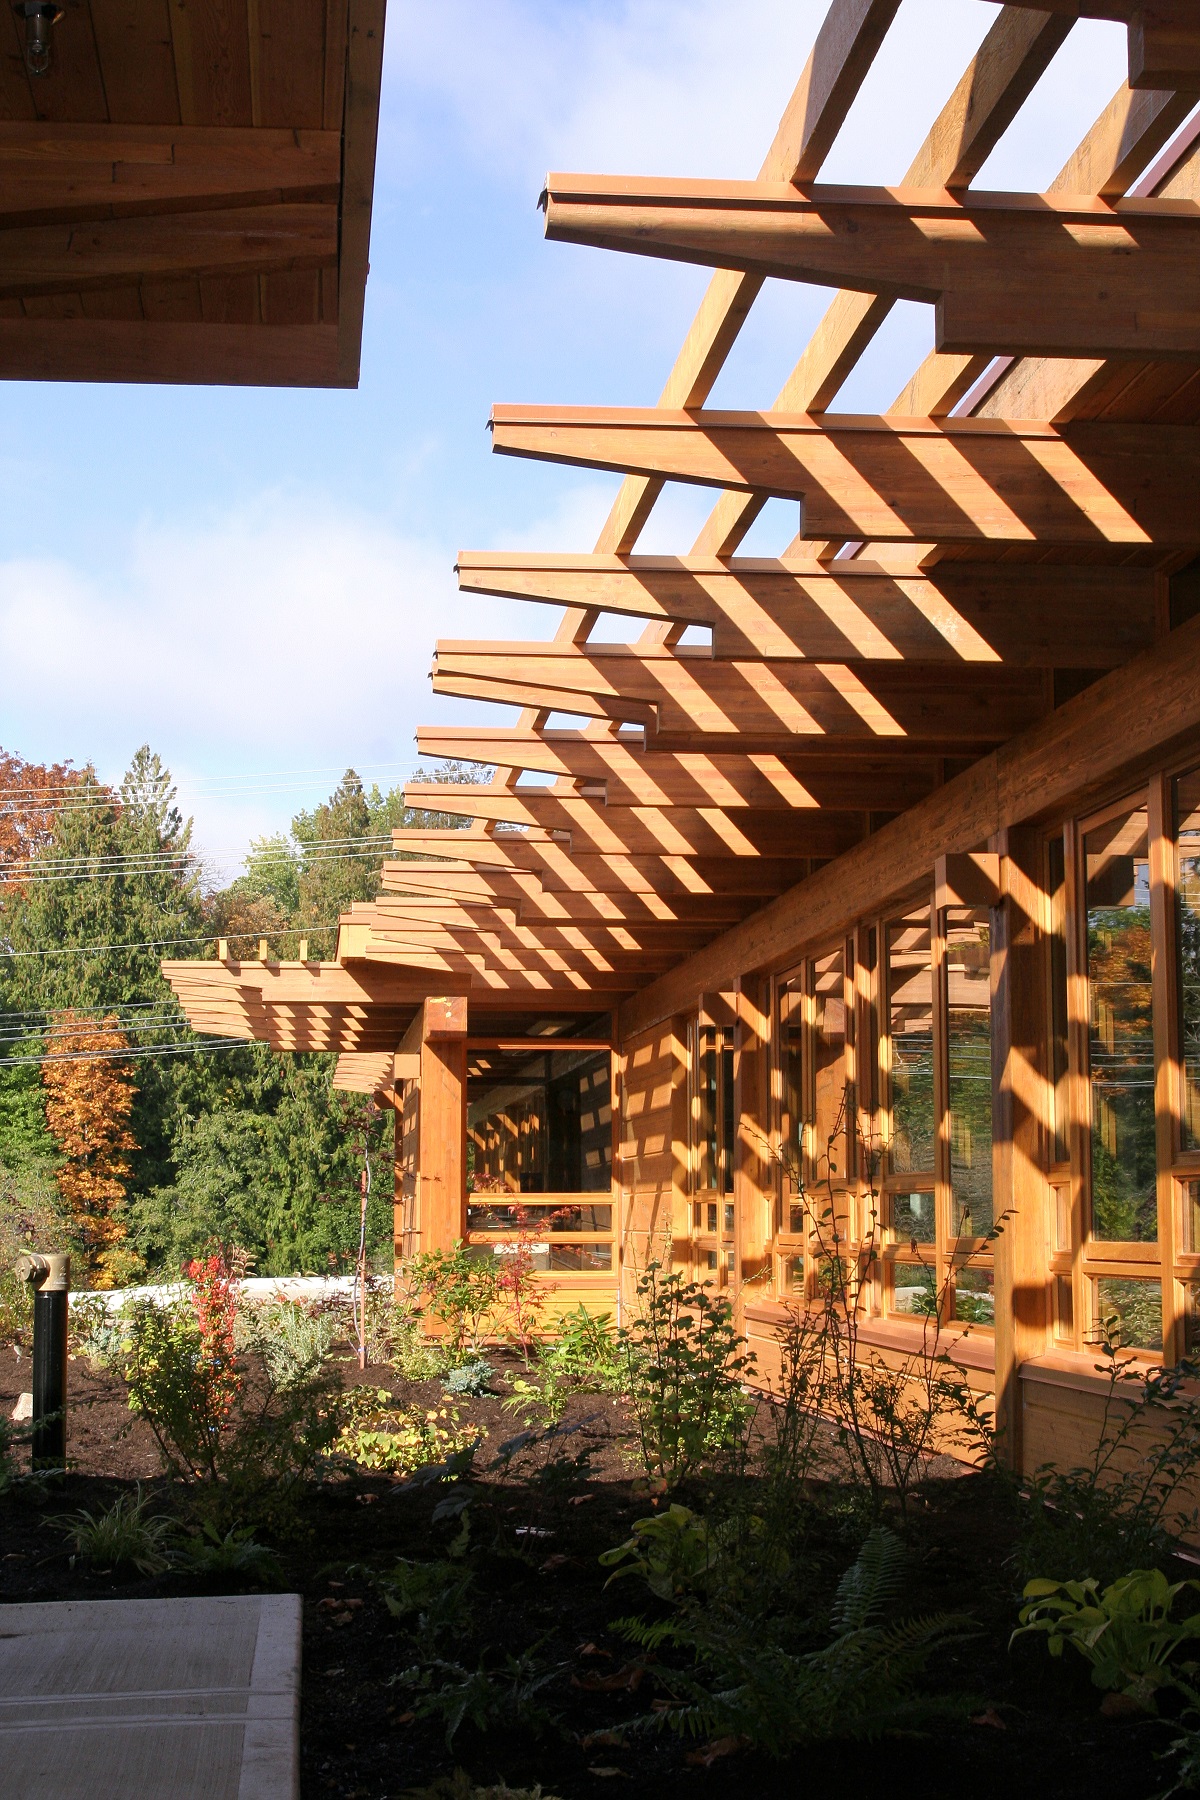 glue-laminated timber (glulam), millwork, paneling, and siding are all show in this sunny exterior image of the Tseshaht Tribal Multiplex and Health Centre which highlights the abundant use of exterior wood for the window trim, roof trusses, eves, and more